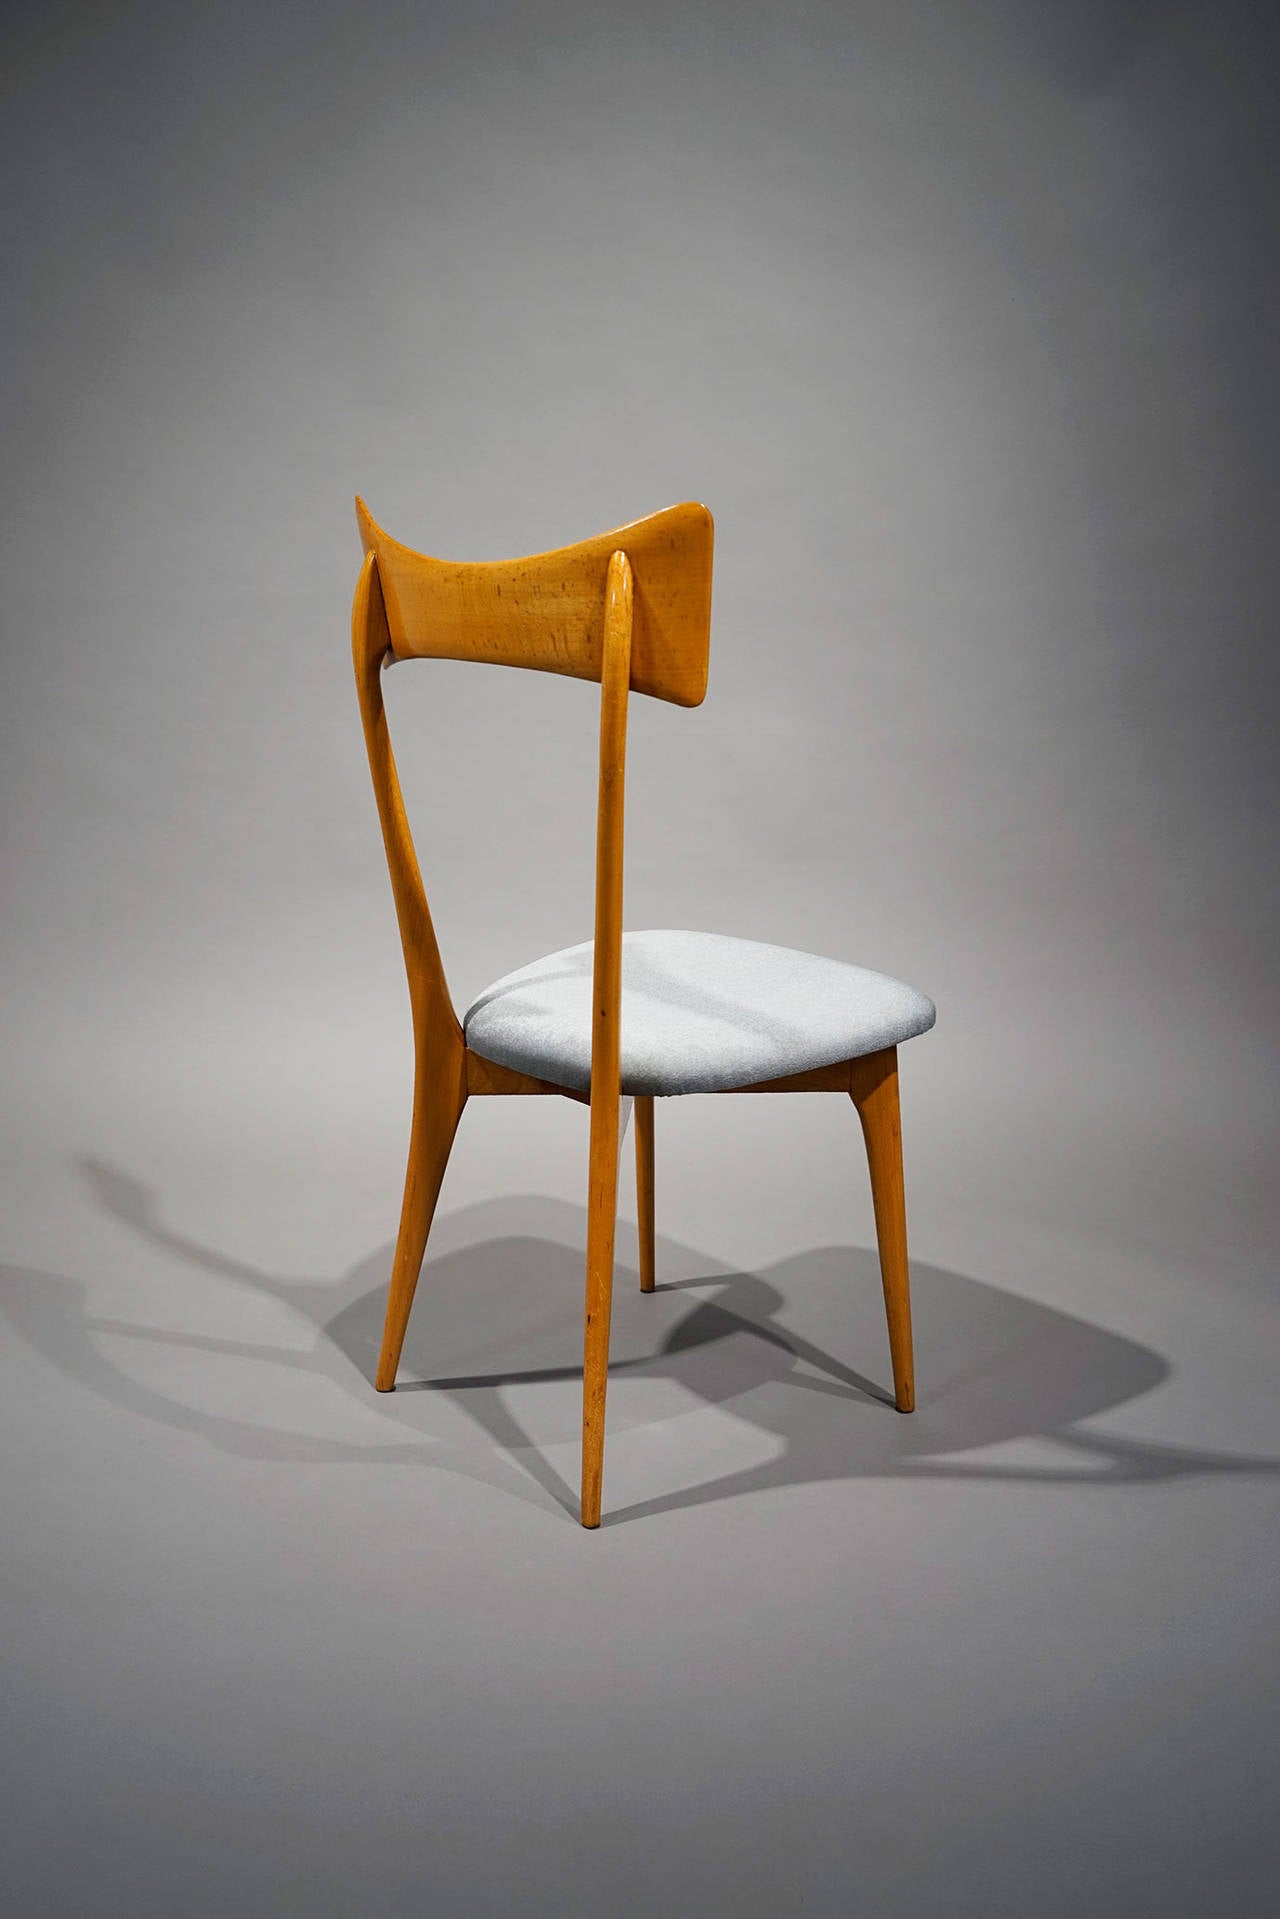 Italian Set of Six Chairs by Luisa & Ico Parisi, Colombo Cantú, Italy, 1945